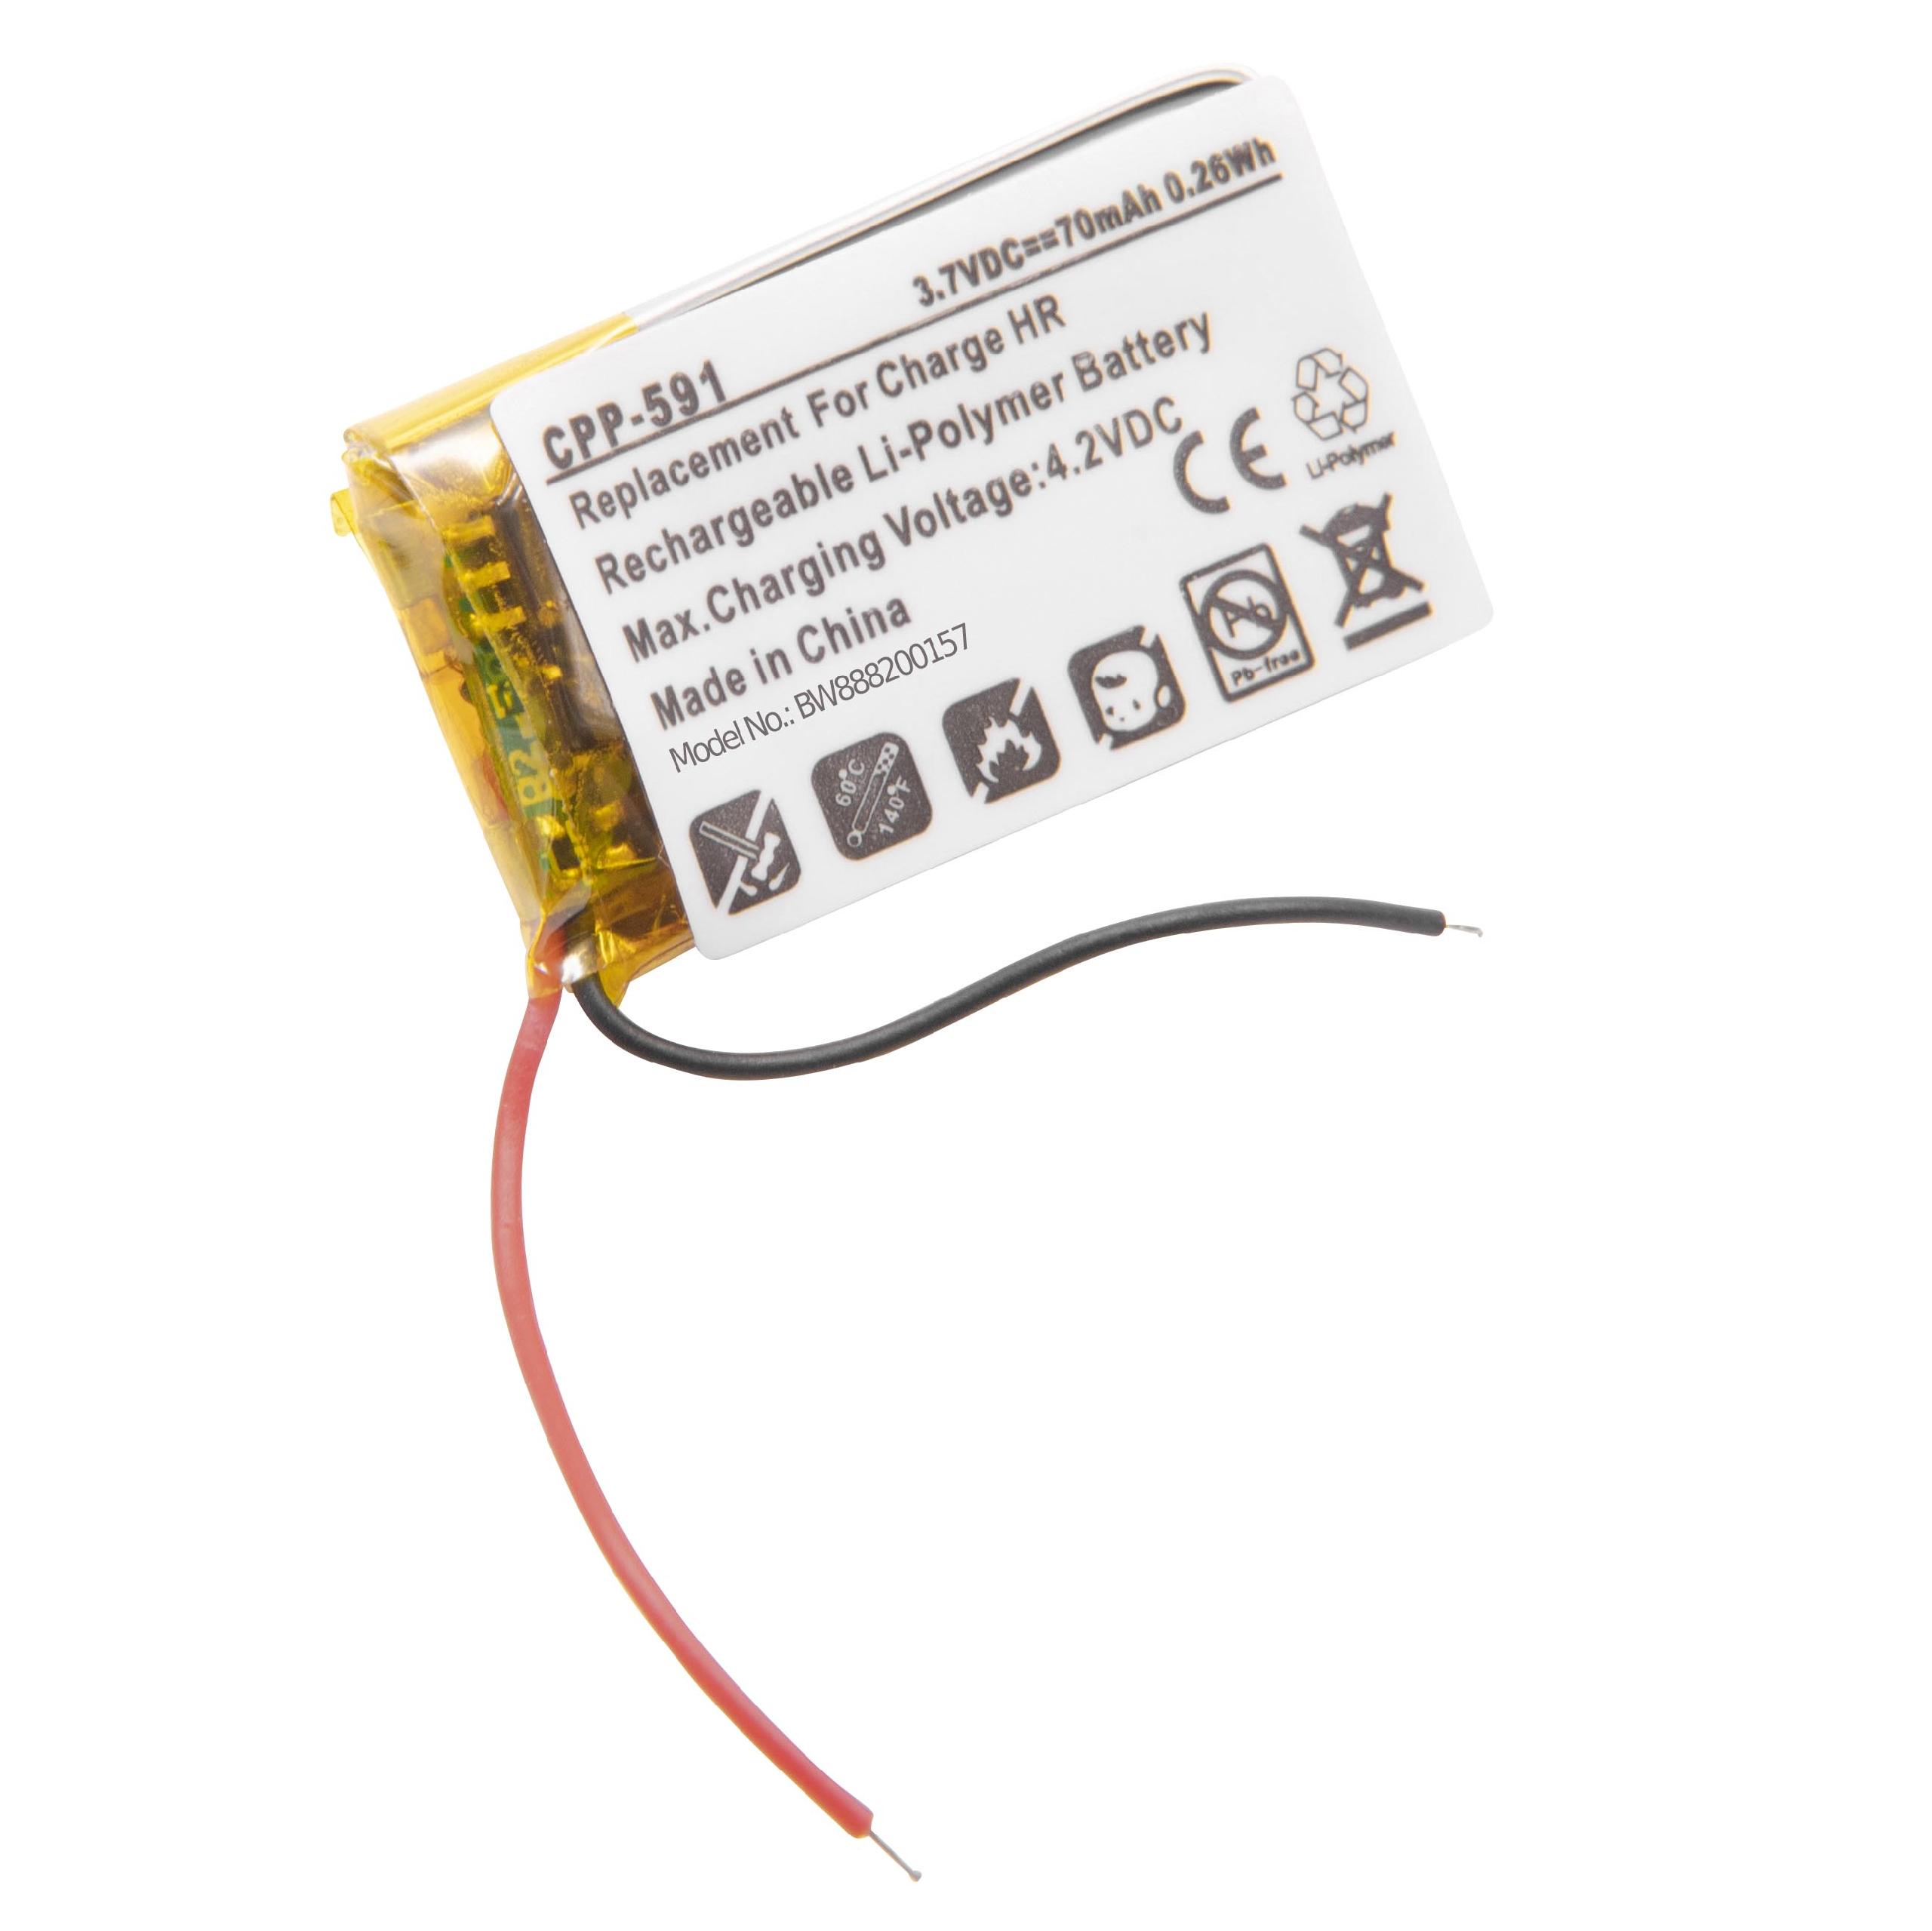 Smartwatch Battery Replacement for Fitbit LSSP031420AB - 70mAh 3.7V Li-polymer